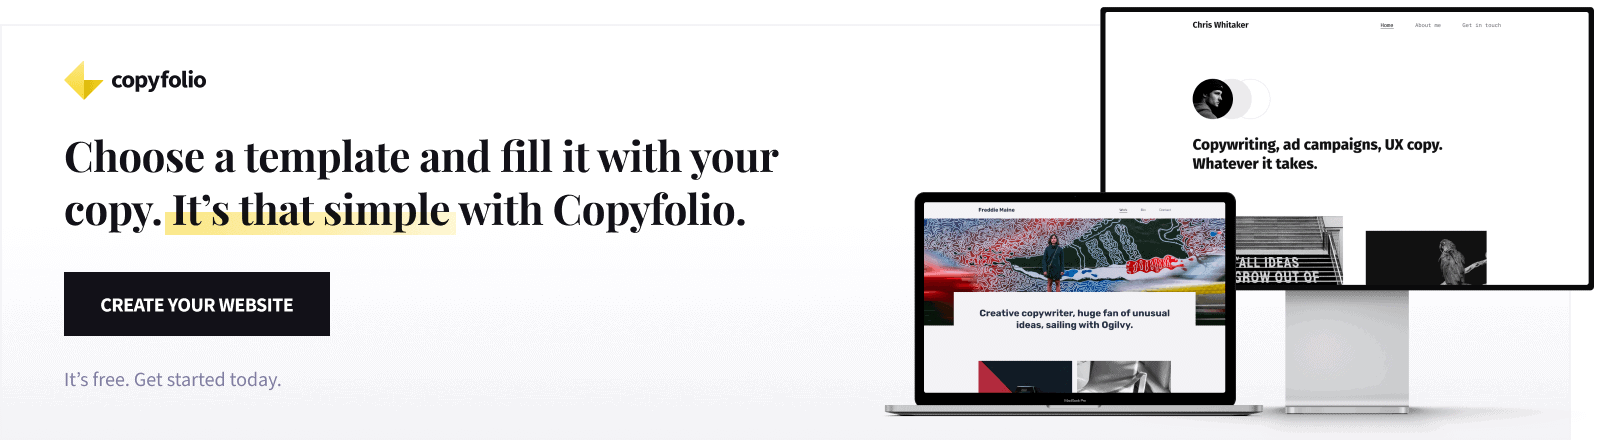 Choose a template and fill it with your copy. It's that simple with Copyfolio. Create your website!